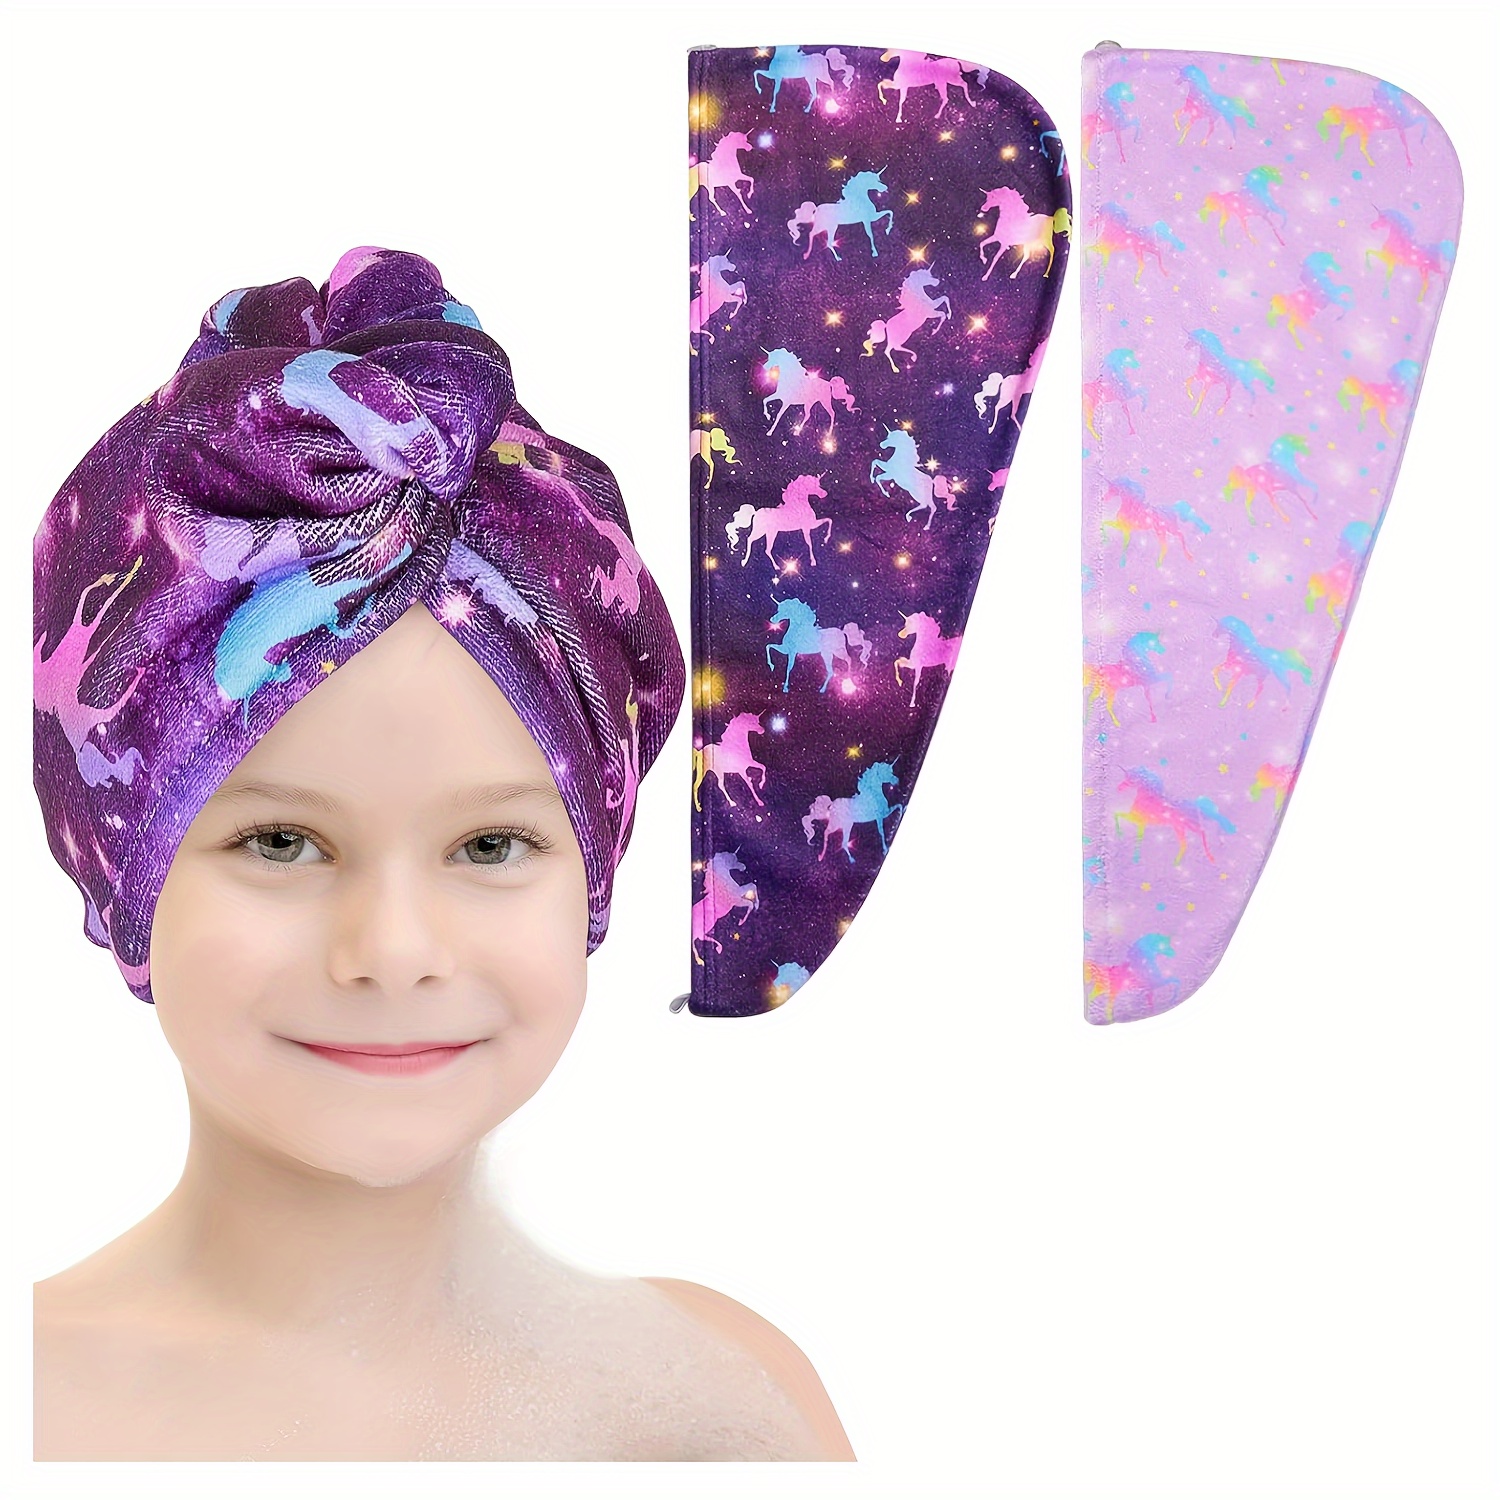 

1pc Unicorn Allover Print Microfiber Hair Towel Wrap With Button, Soft Quick Dry Towel Turban, Absorbent Hair Drying Towel For Women, Bathroom Supplies